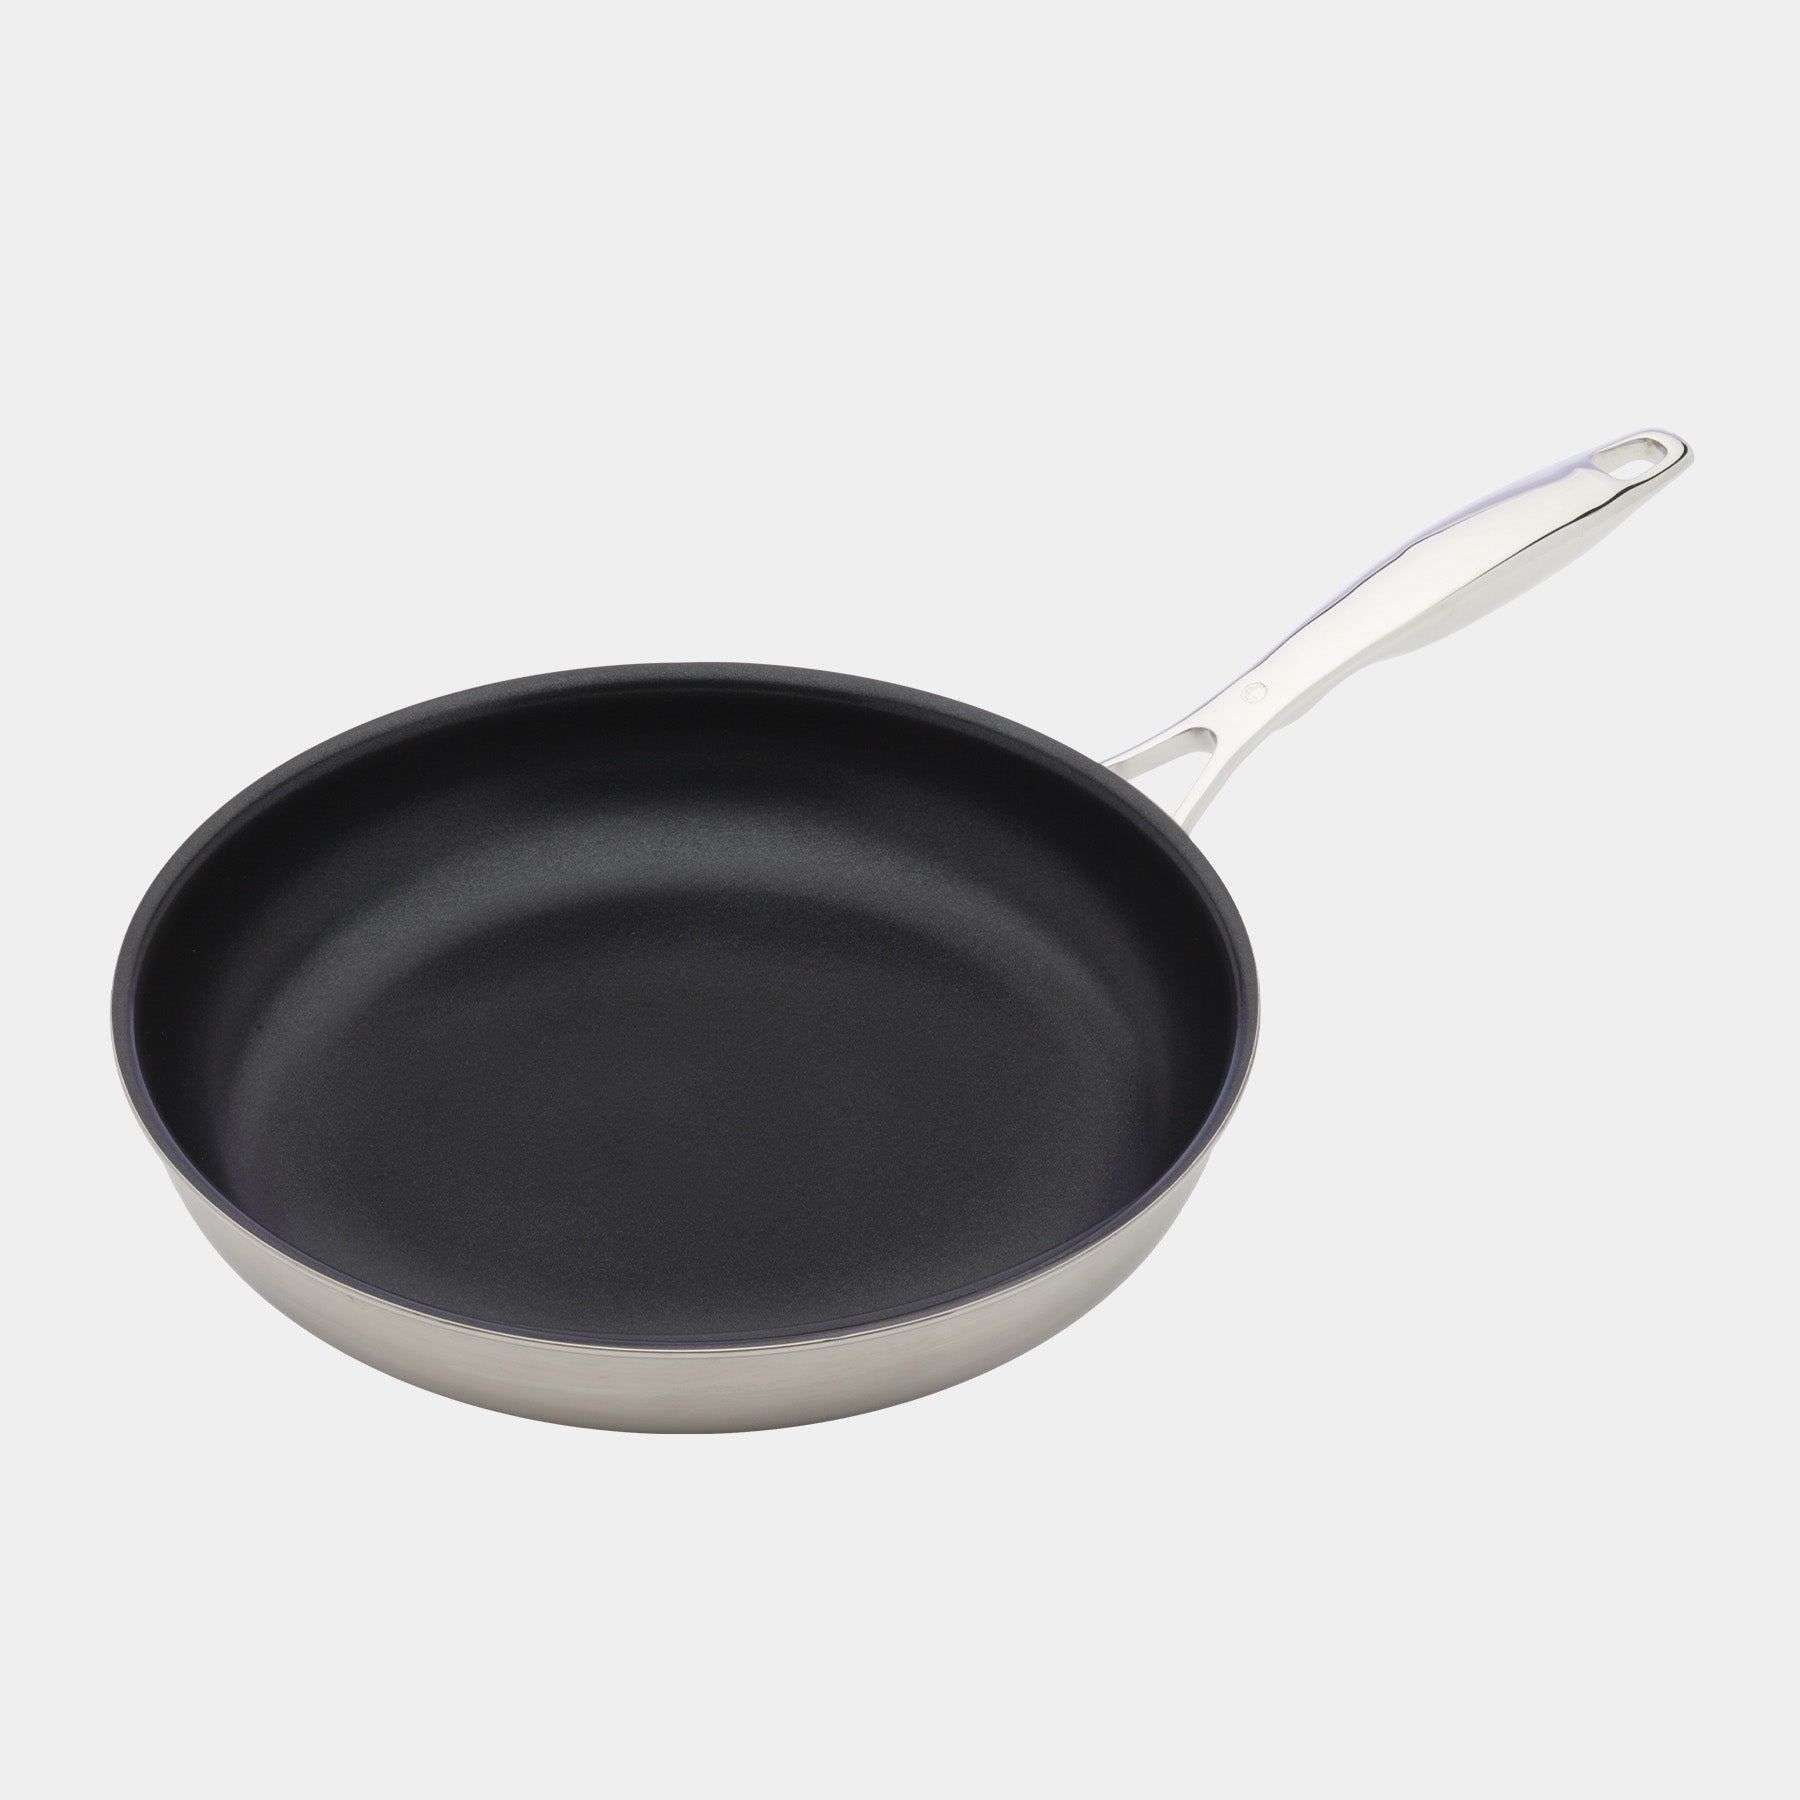 Nonstick Clad 11" Fry Pan - Induction